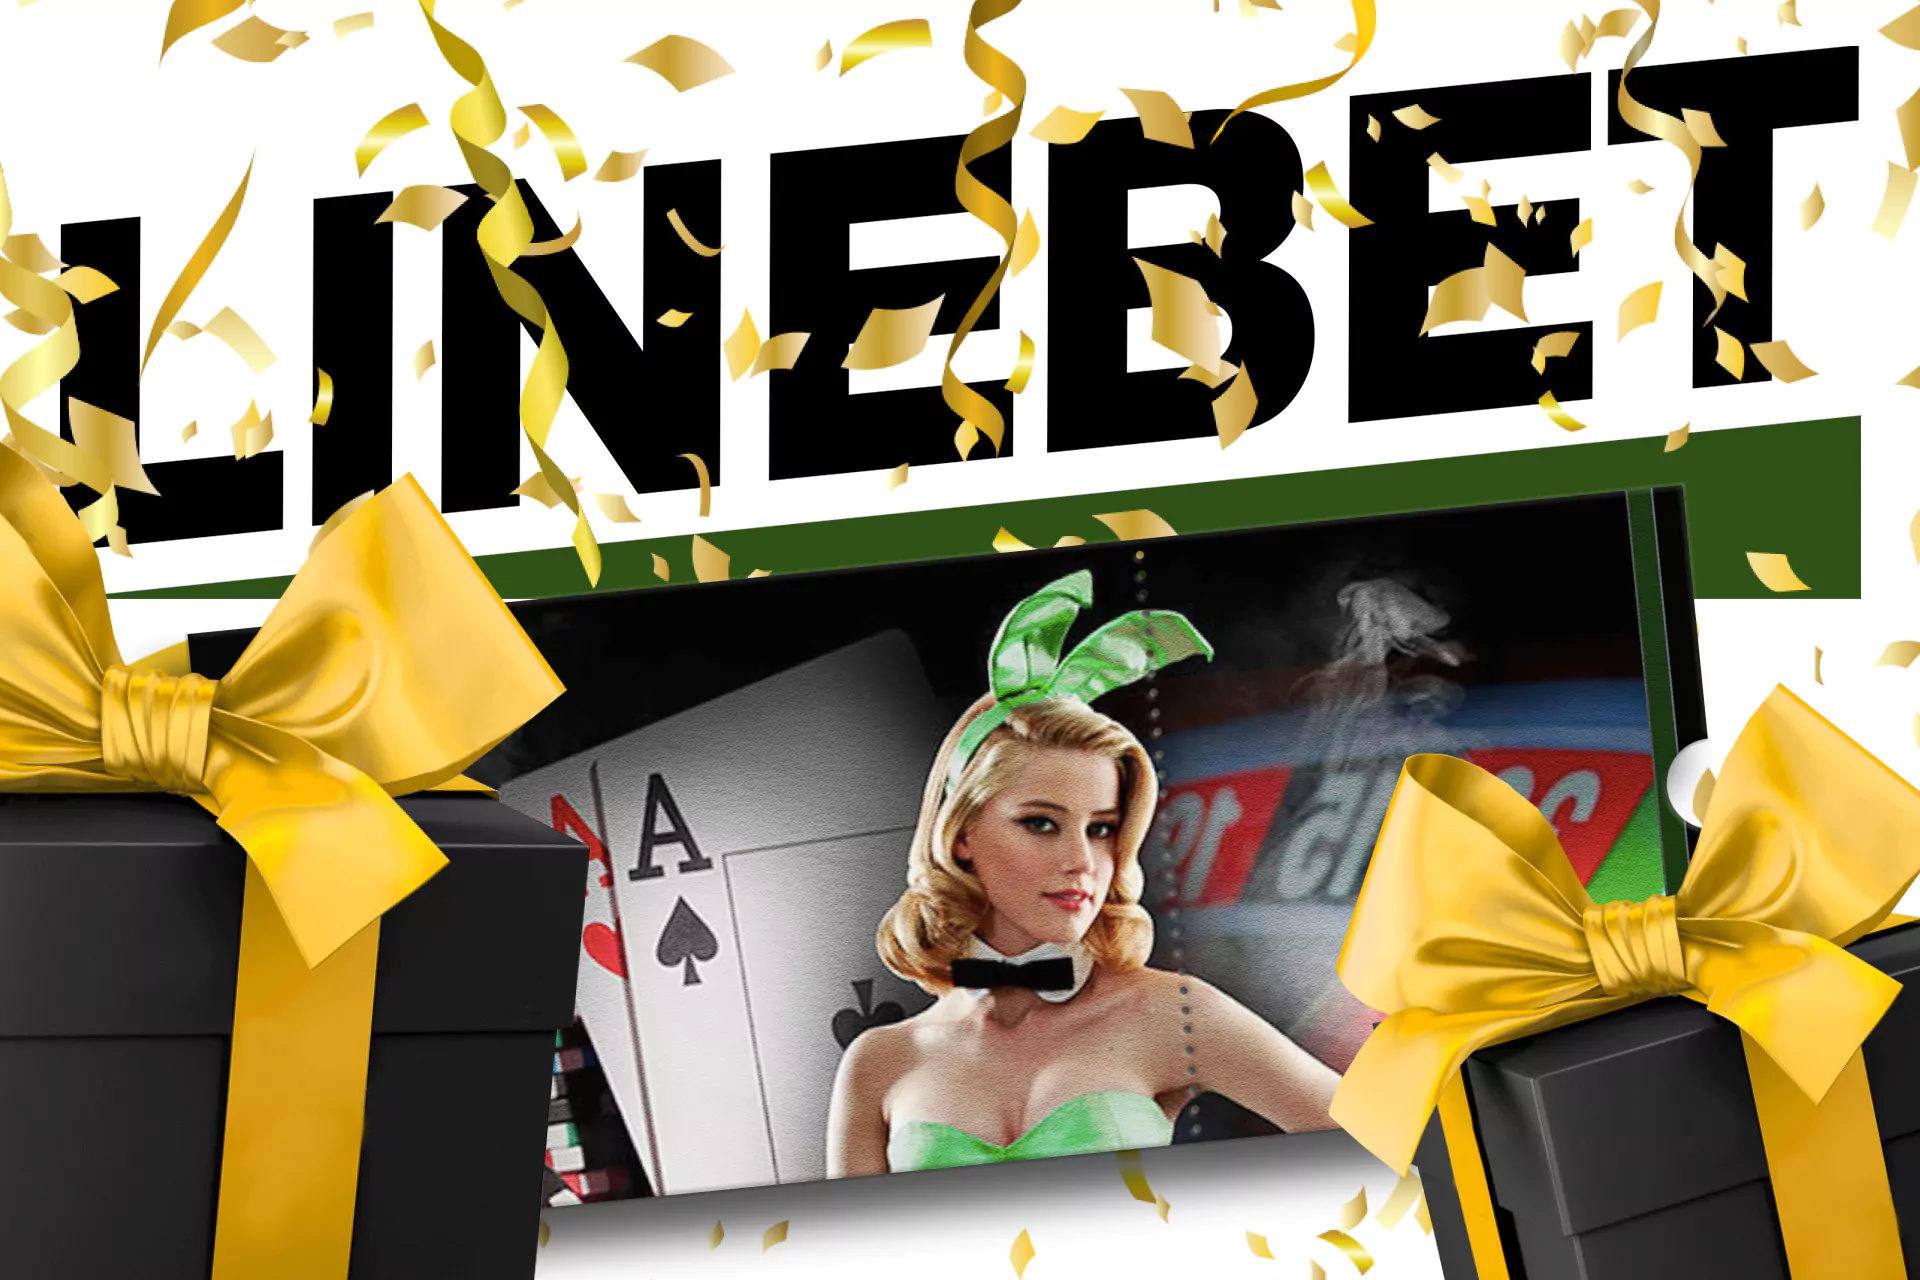 To bet on bingo in Linebet, use a special bonus that will help in the game.